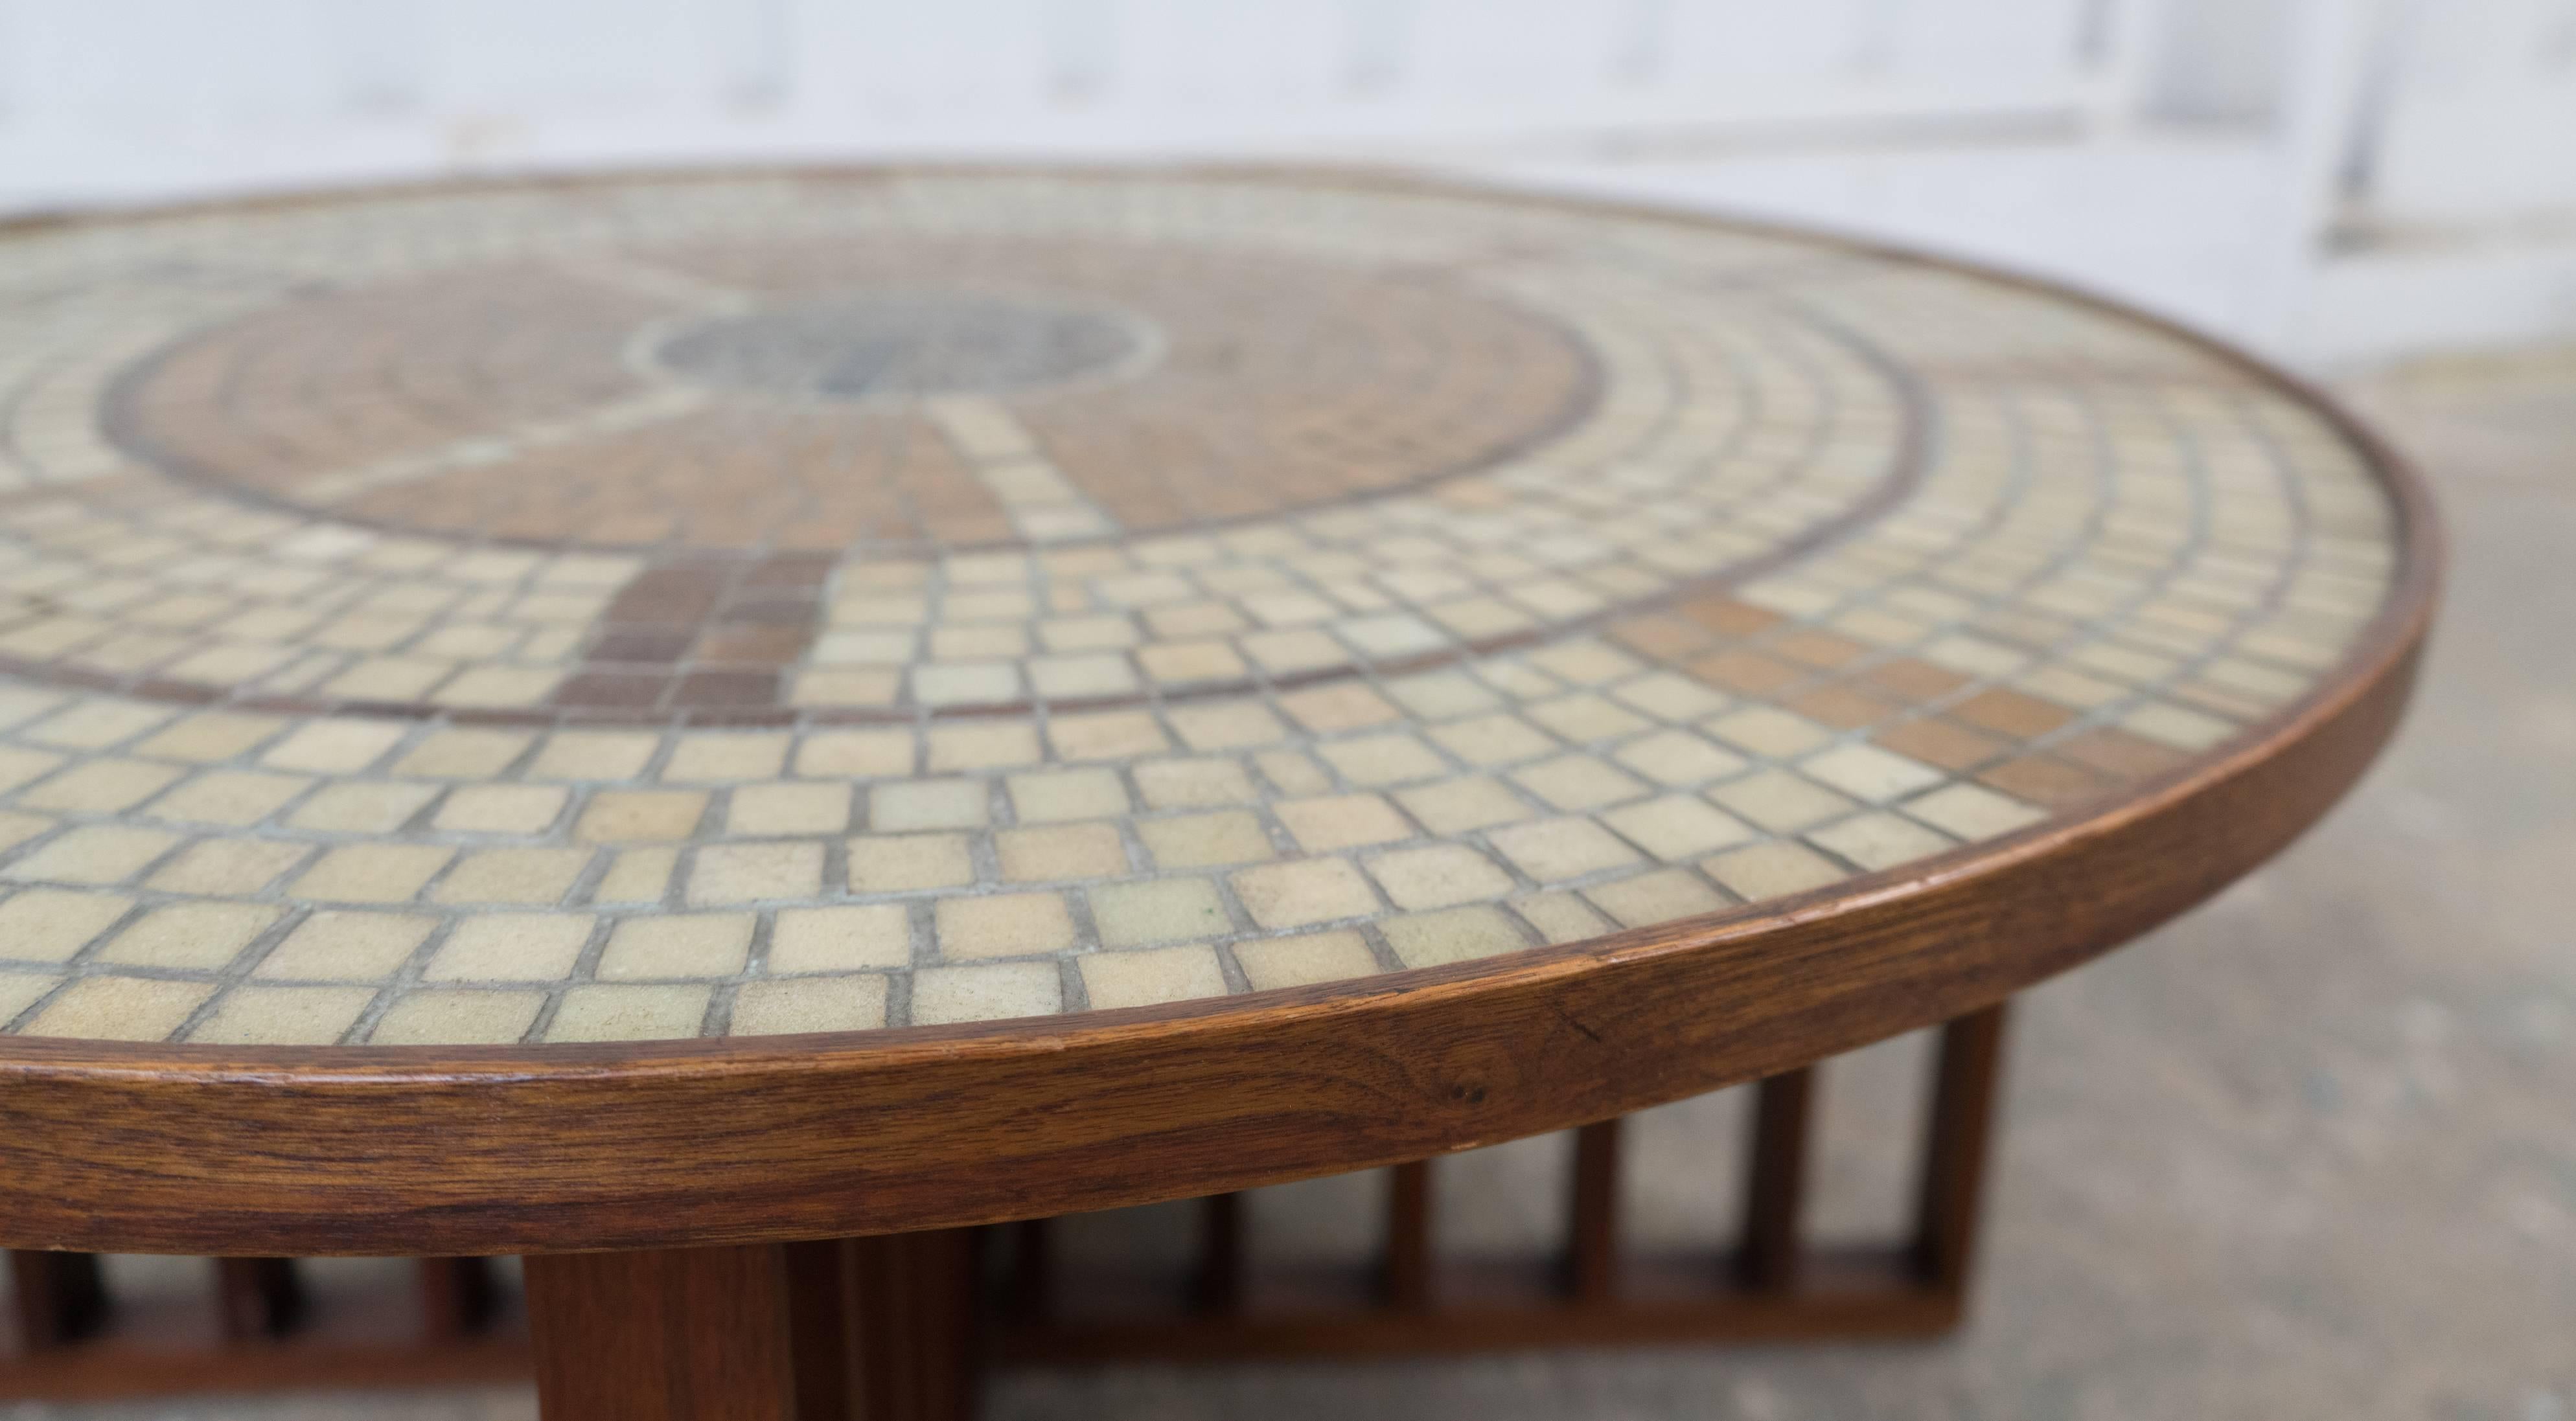 Excellent condition walnut coffee table with concentric mosaic design of glass tiles from the 1960s.